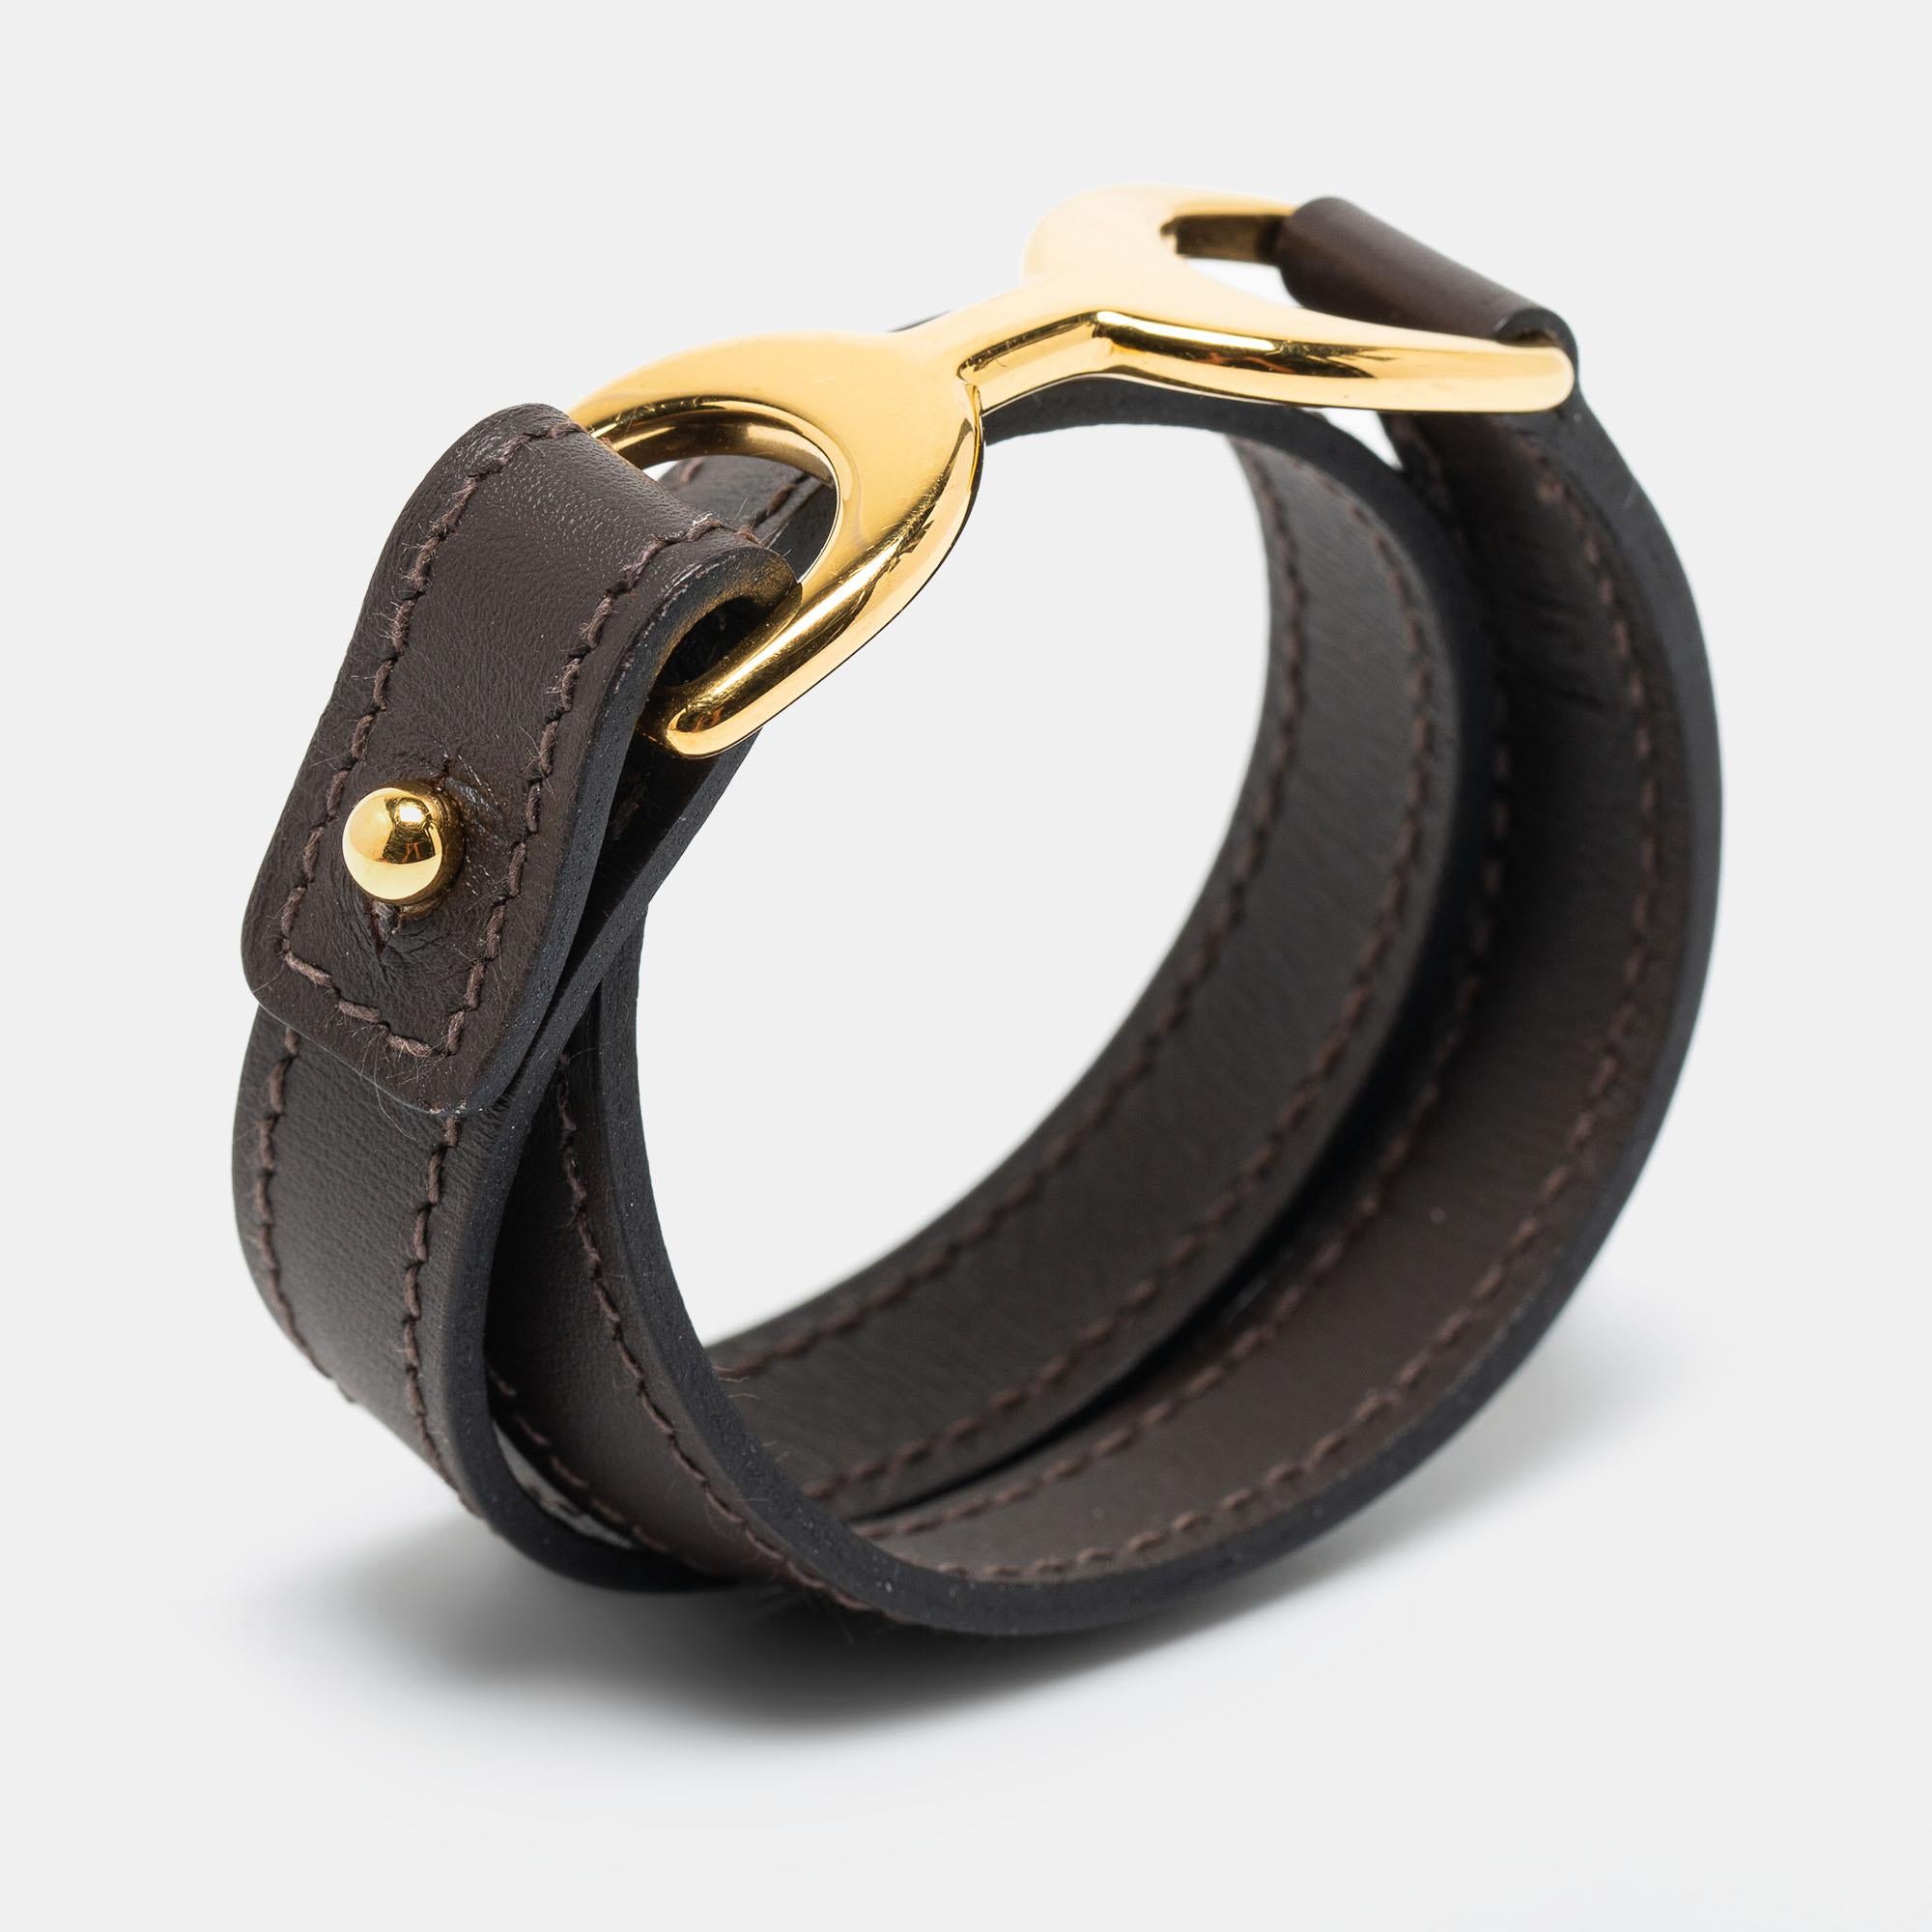 Hermes Chamonix Leather Gold-Plated Bracelet
HERMES
Hermes Chamonix Leather Gold-Plated Bracelet
1,627 AED
Get 184 AED off on order value 2,938 AED and above. Use Voucher: SAVEMORE
All Inclusive
BUY NOW
ADD TO BAG
Pay as low as AED 542/month without